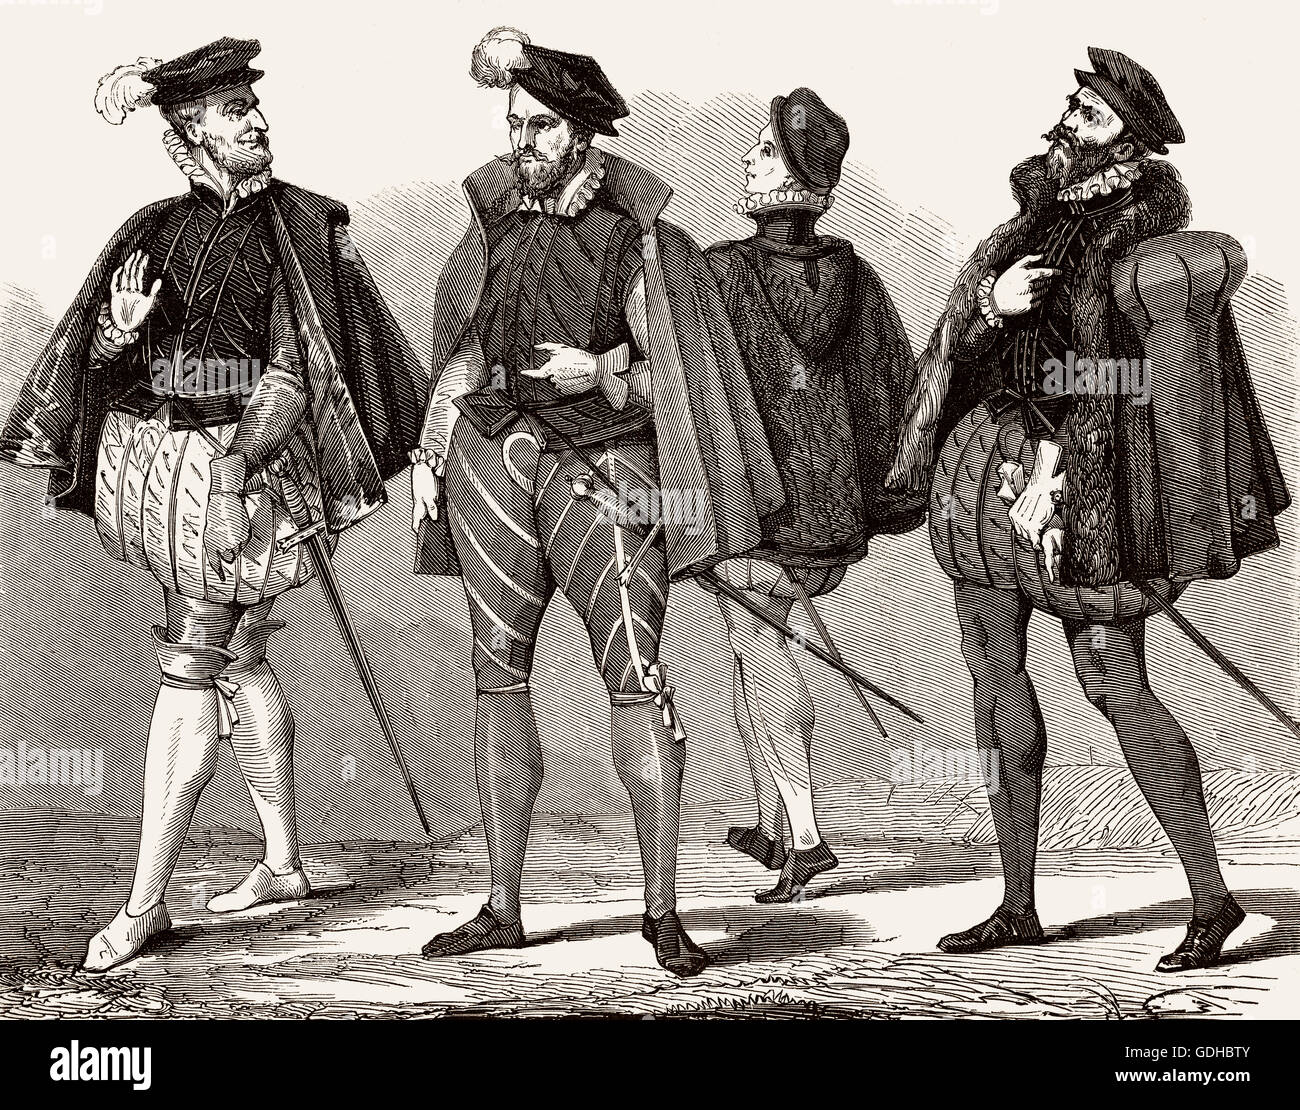 costumes for men in the 16th century Stock Photo